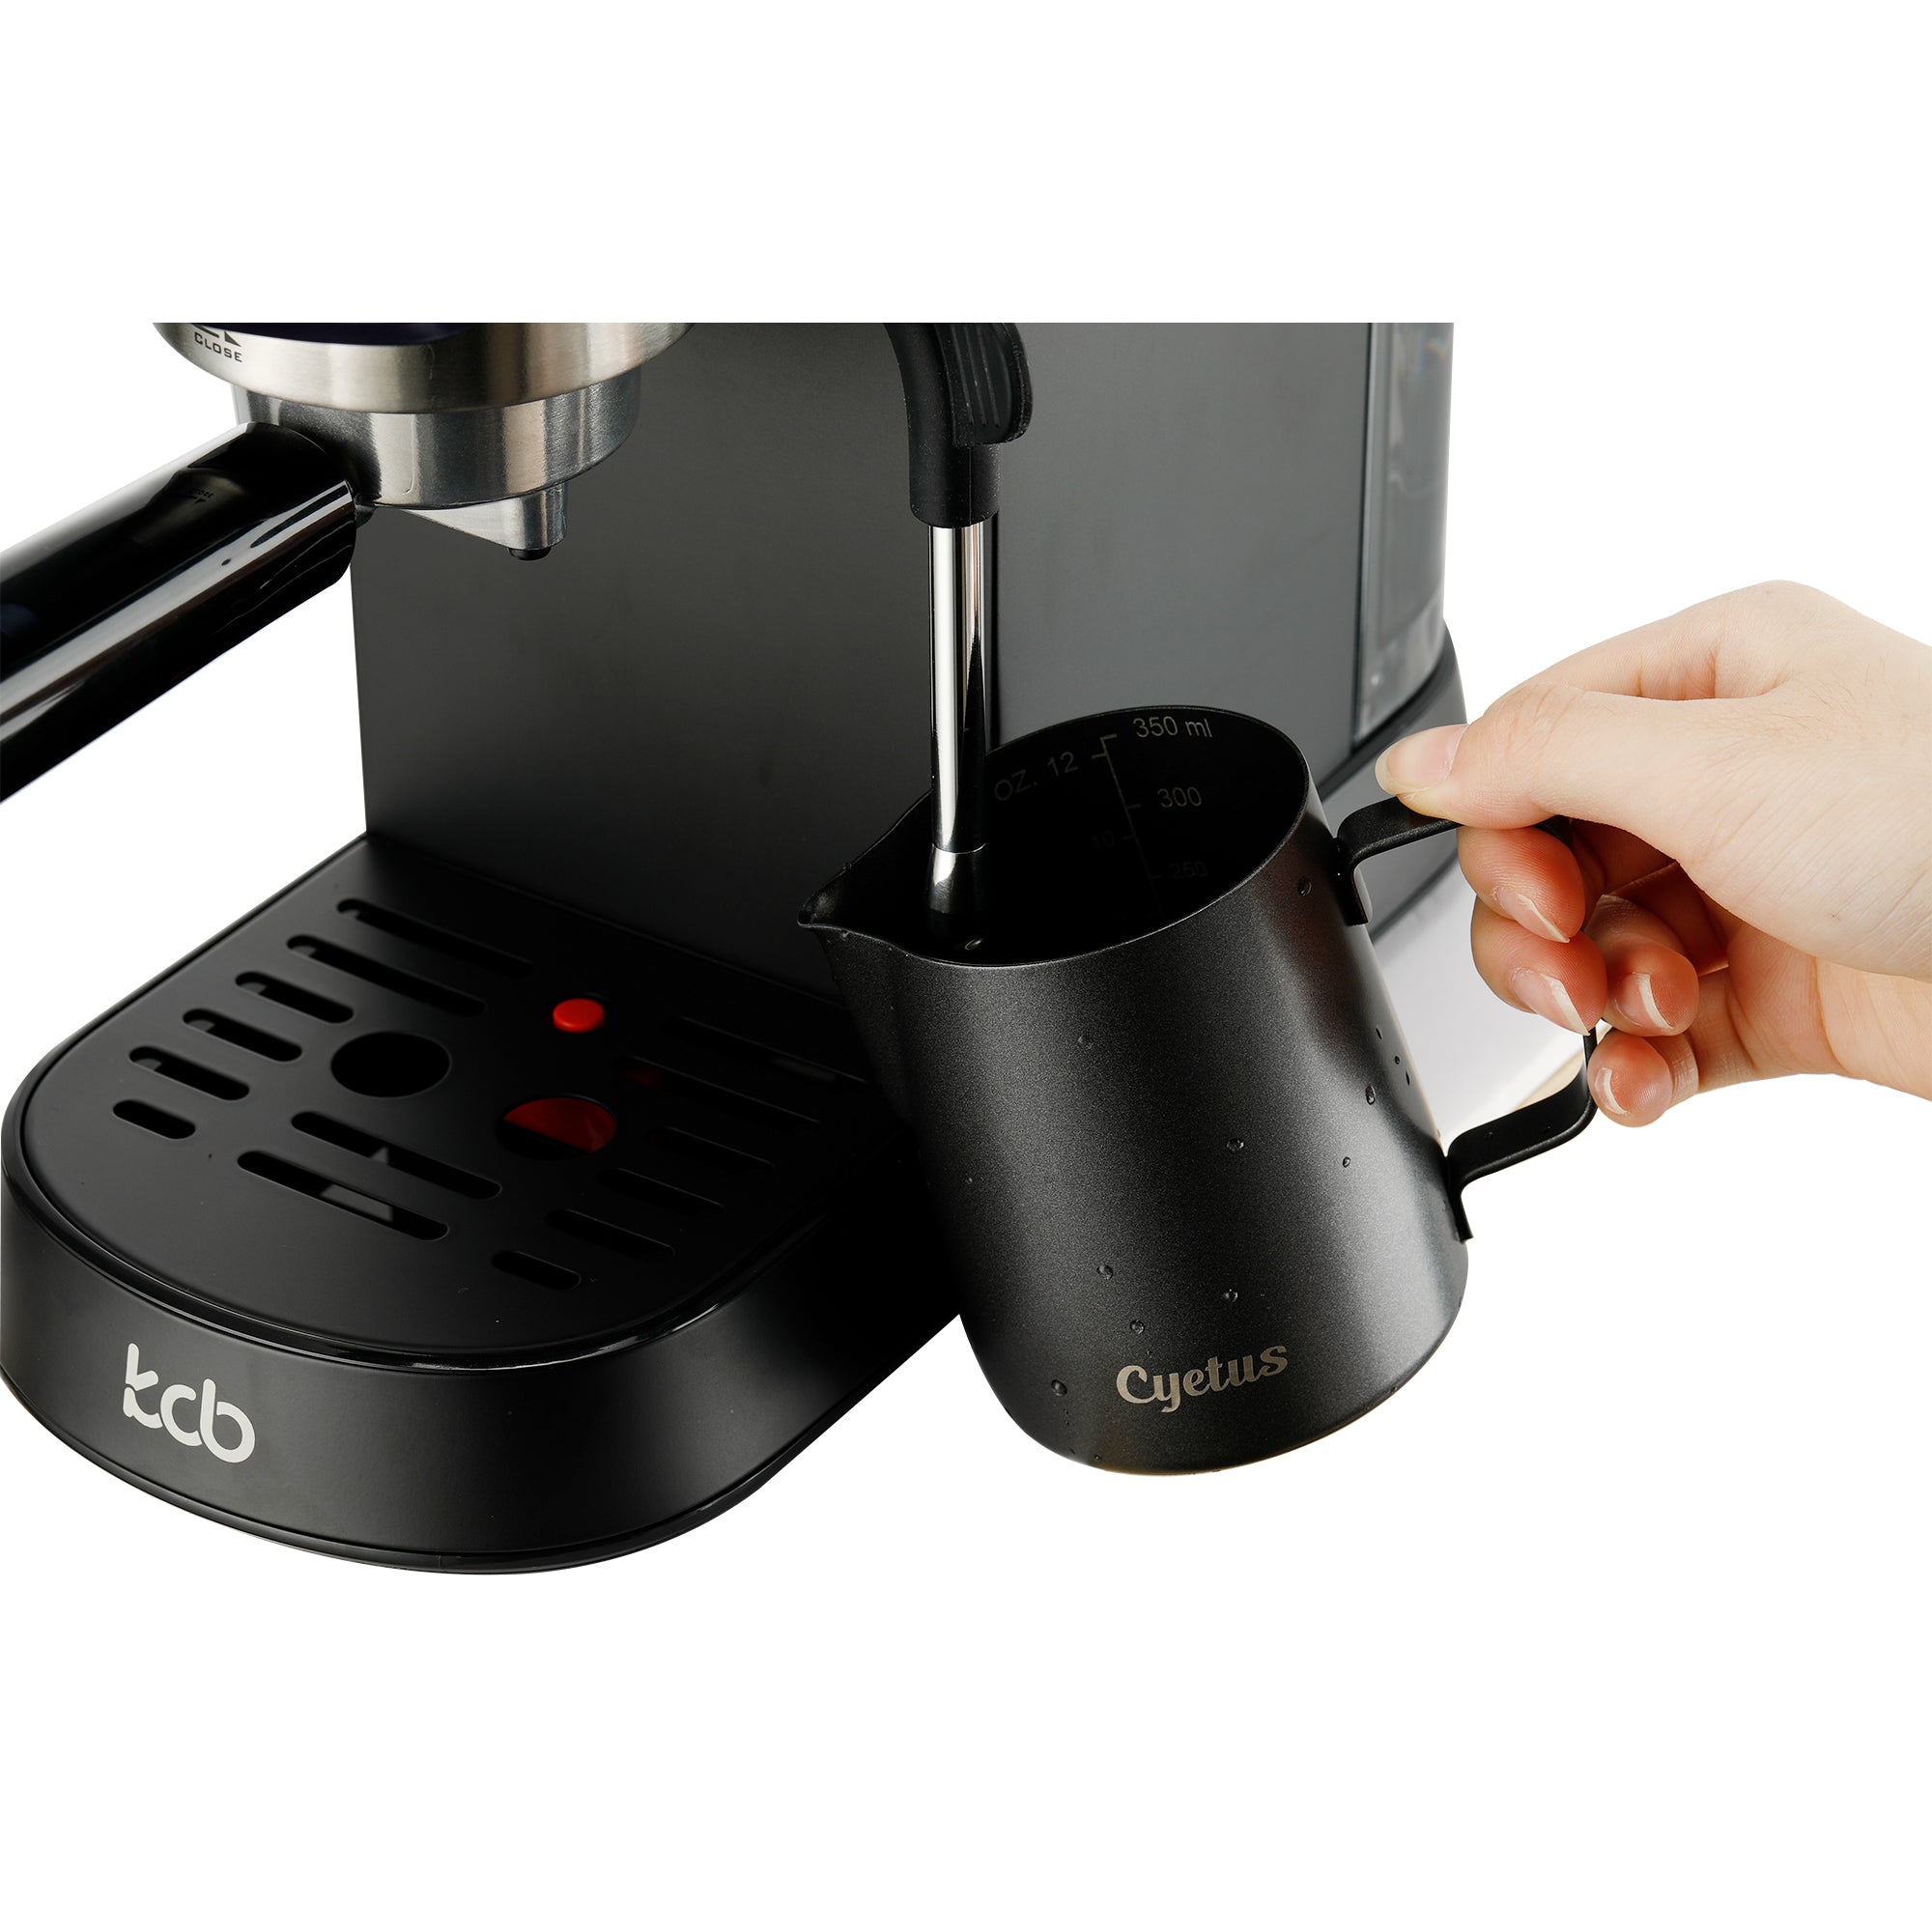 CYETUS All in One Espresso Machine for Home Barista CYK7601, Coffee  Grinder, Milk Steam Frother Wand, for Espresso, Cappuccino and Latte, Black